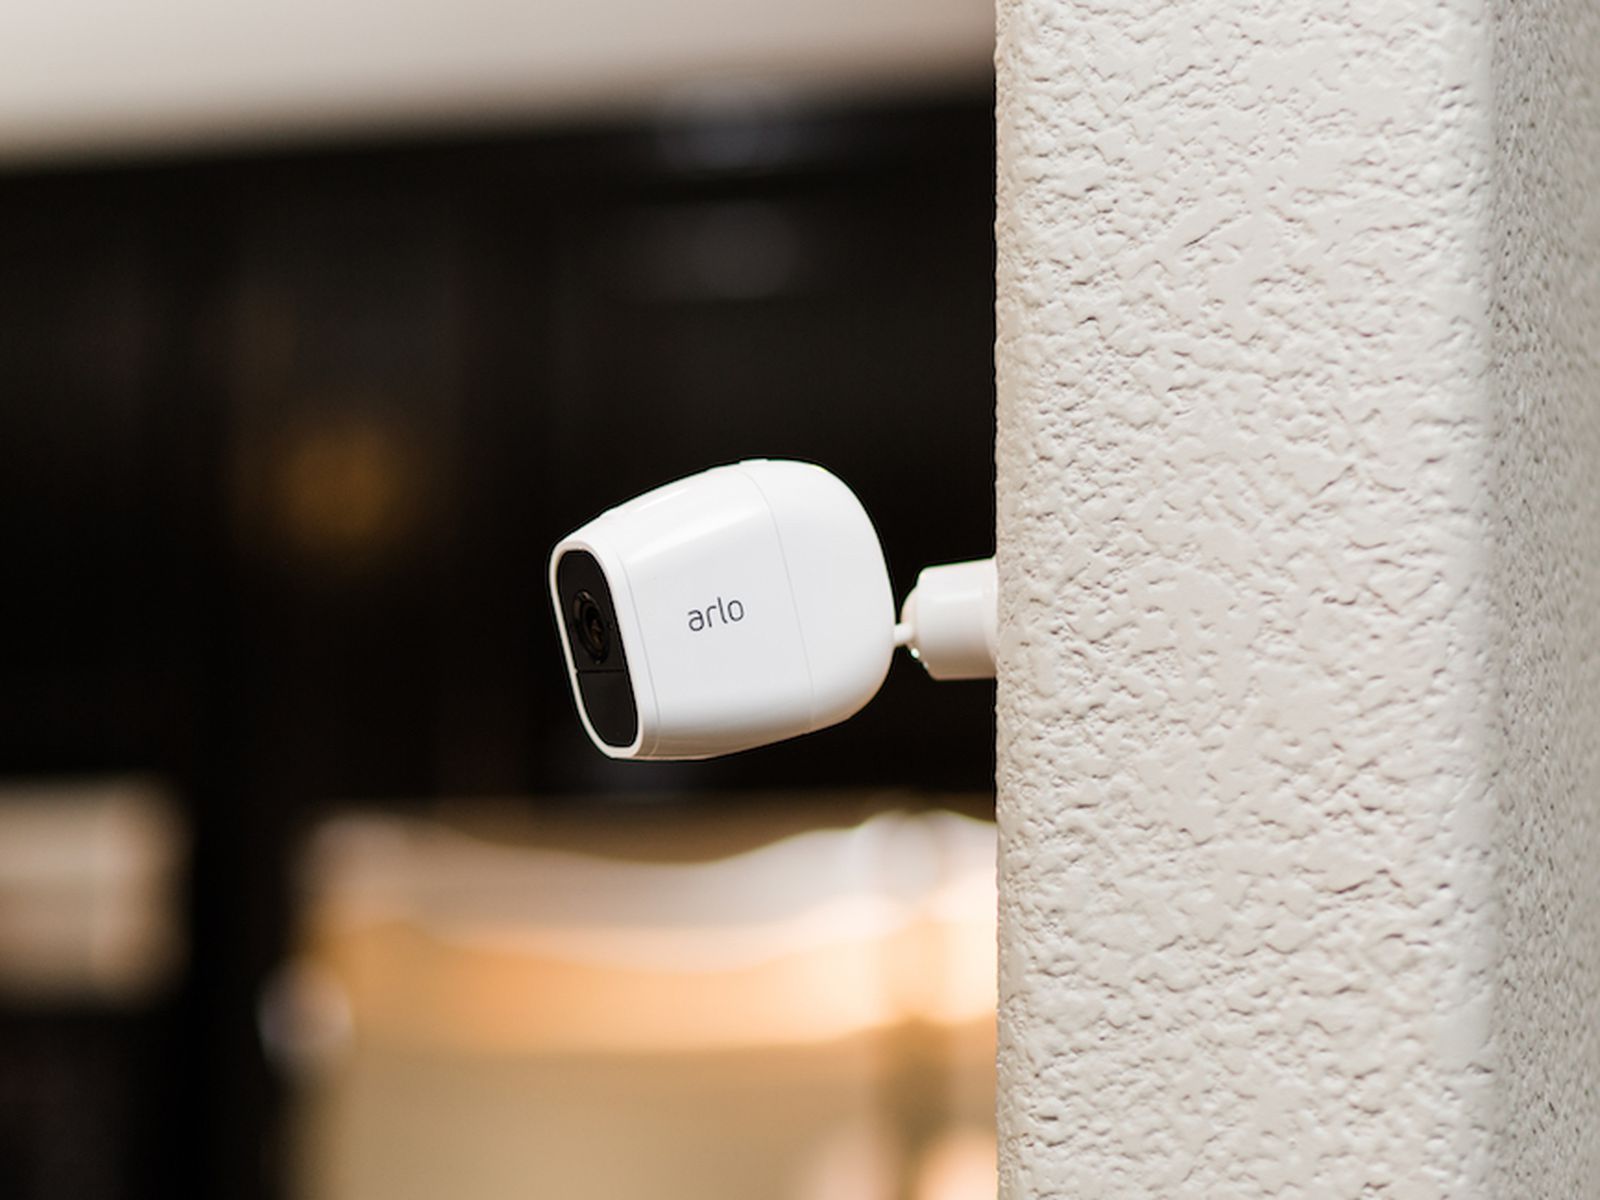 Arlo Pro Camera Firmware Release Notes Suggest Incoming Homekit Support Macrumors